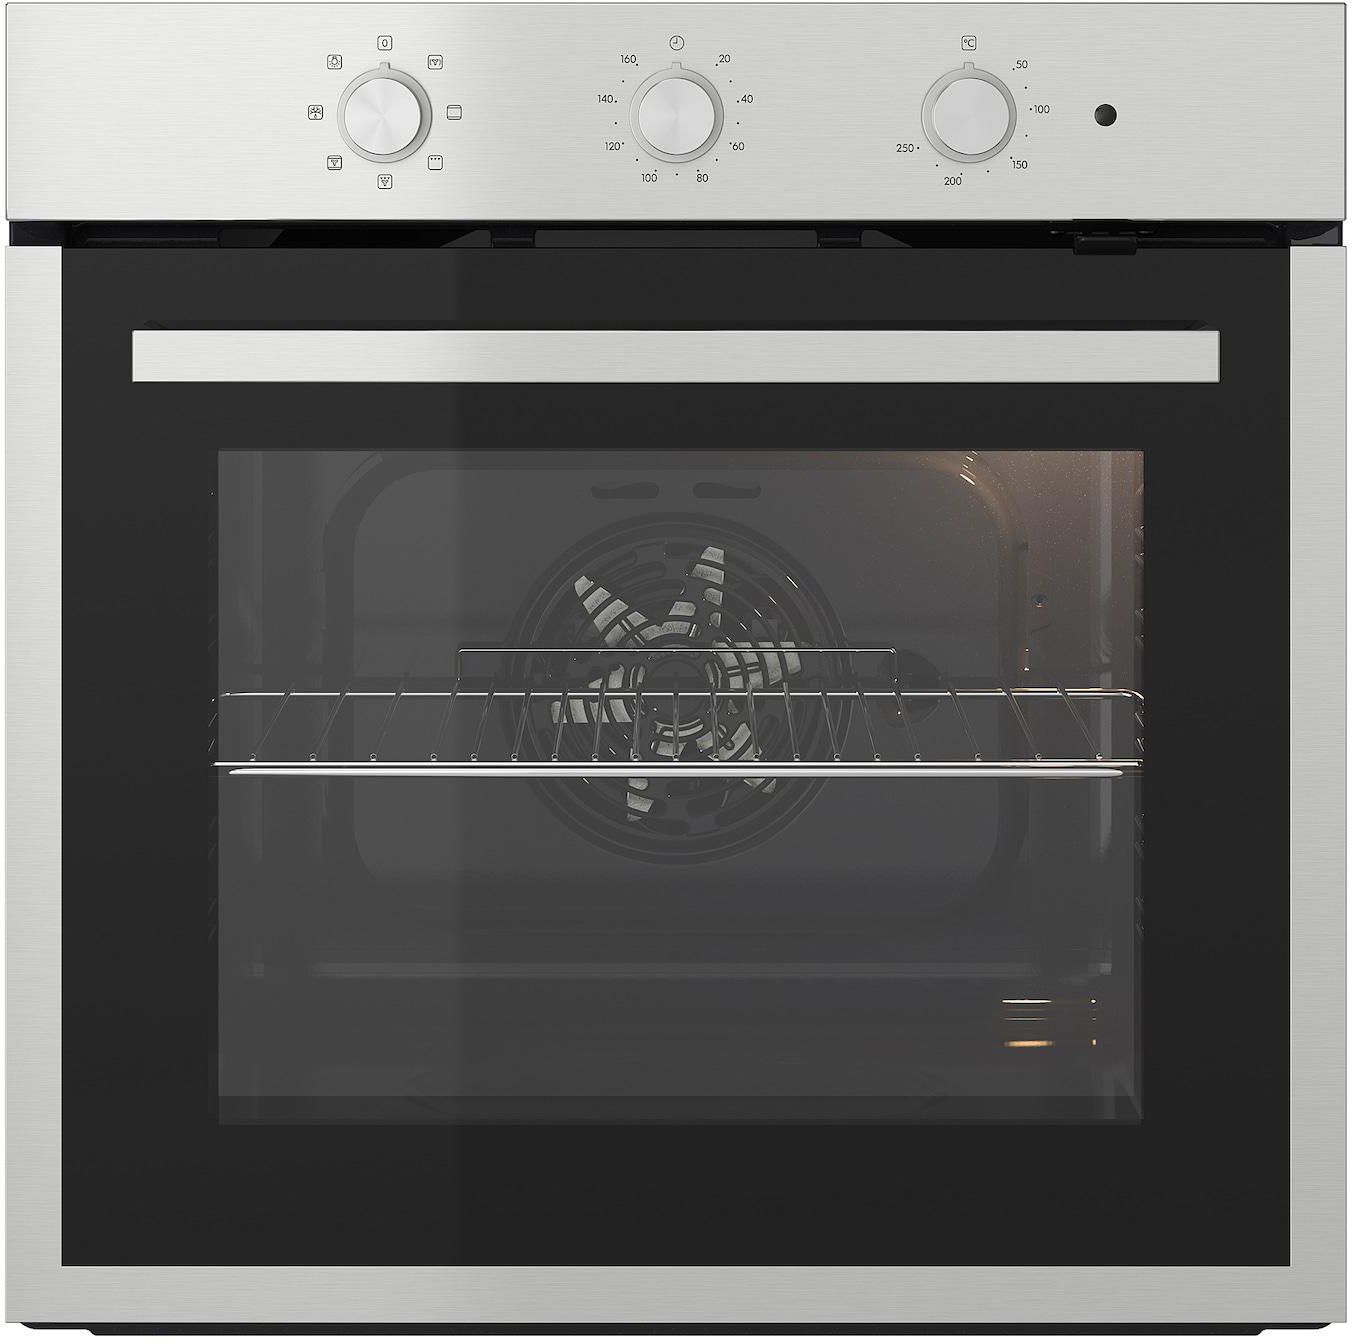 Forced air oven, stainless steel colour